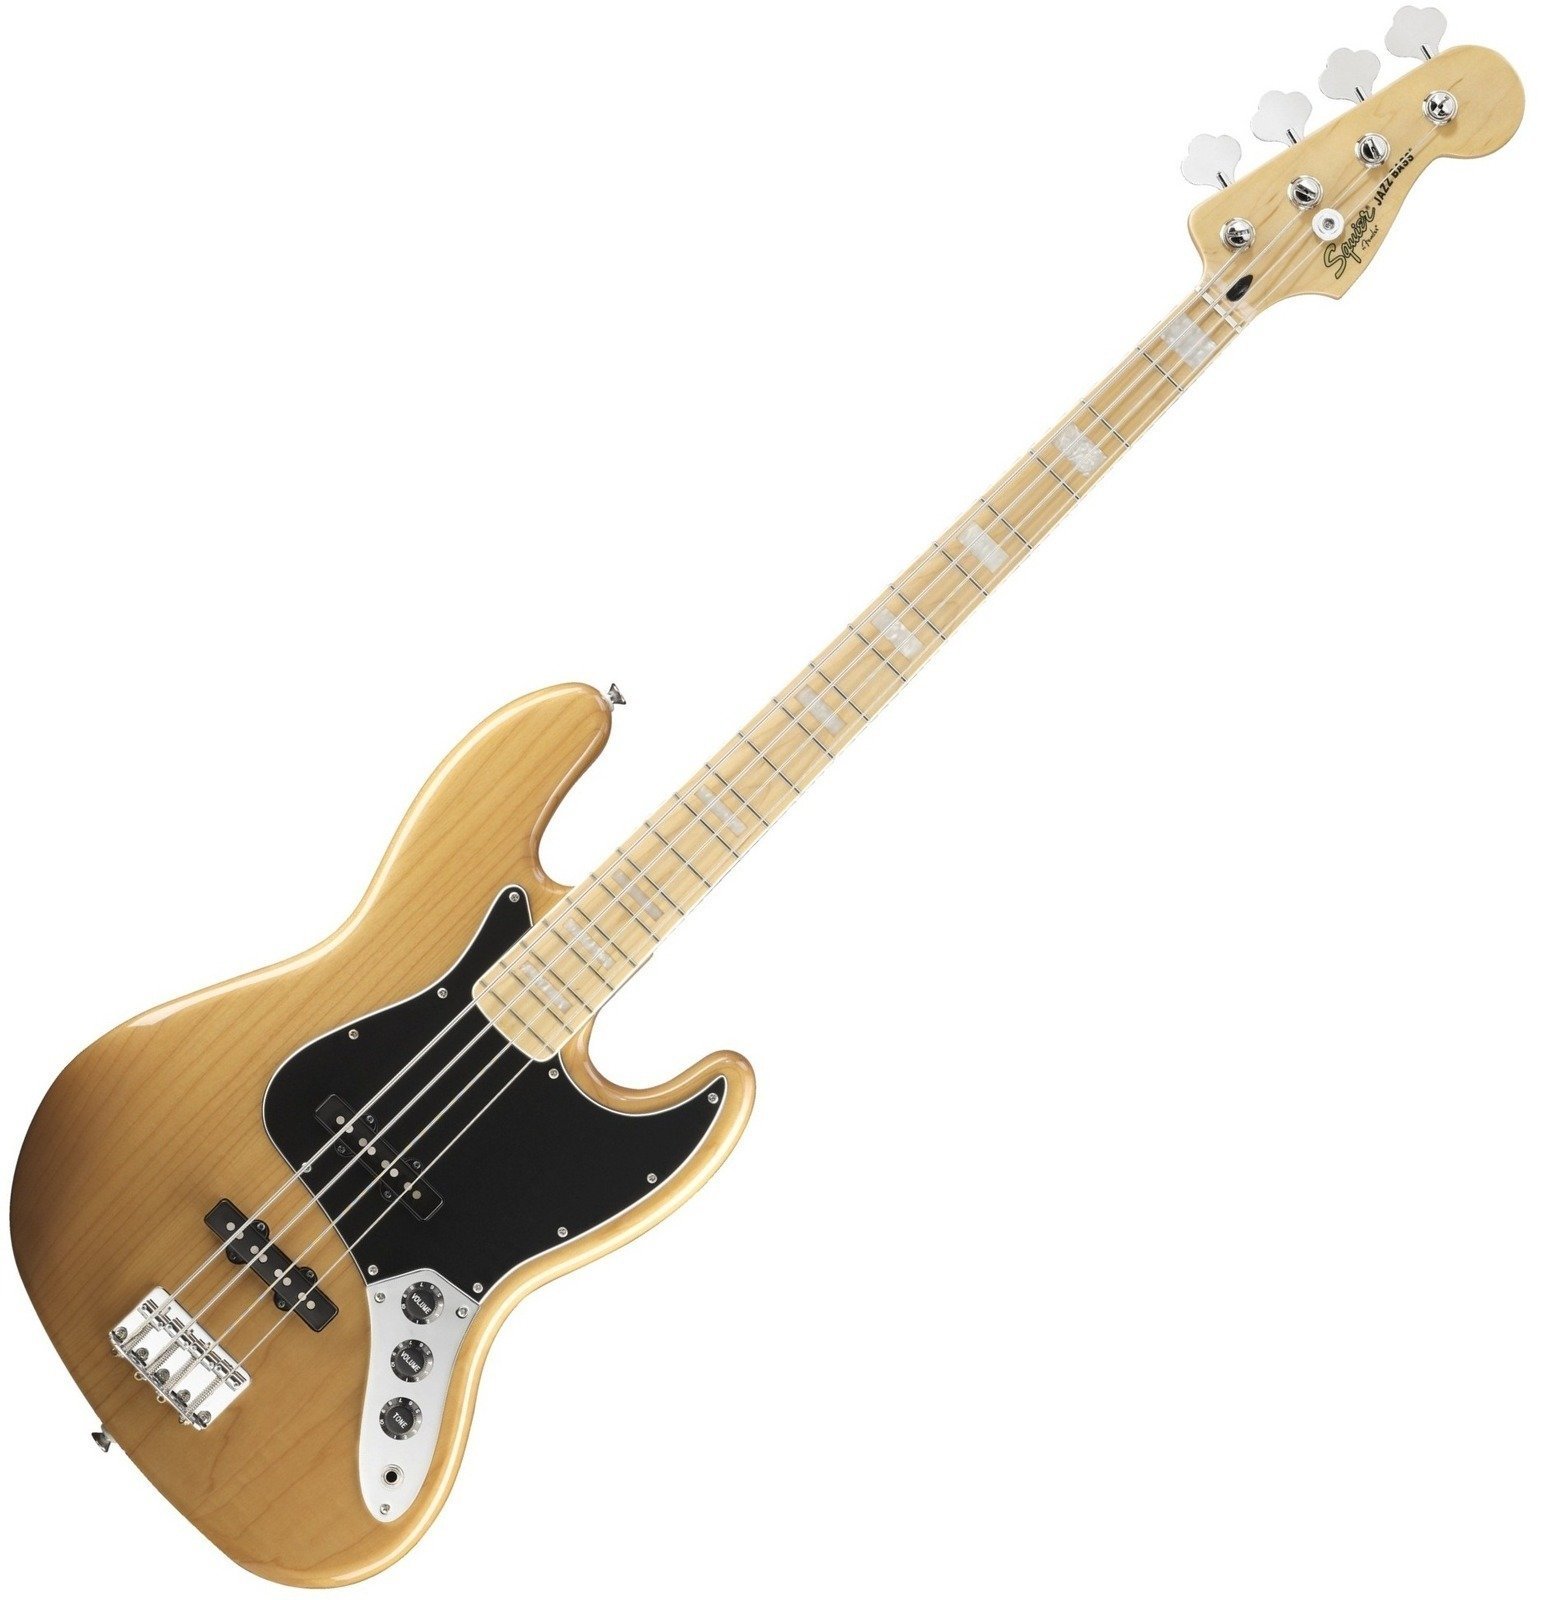 E-Bass Fender Squier Vintage Modified Jazz Bass 77 Amber